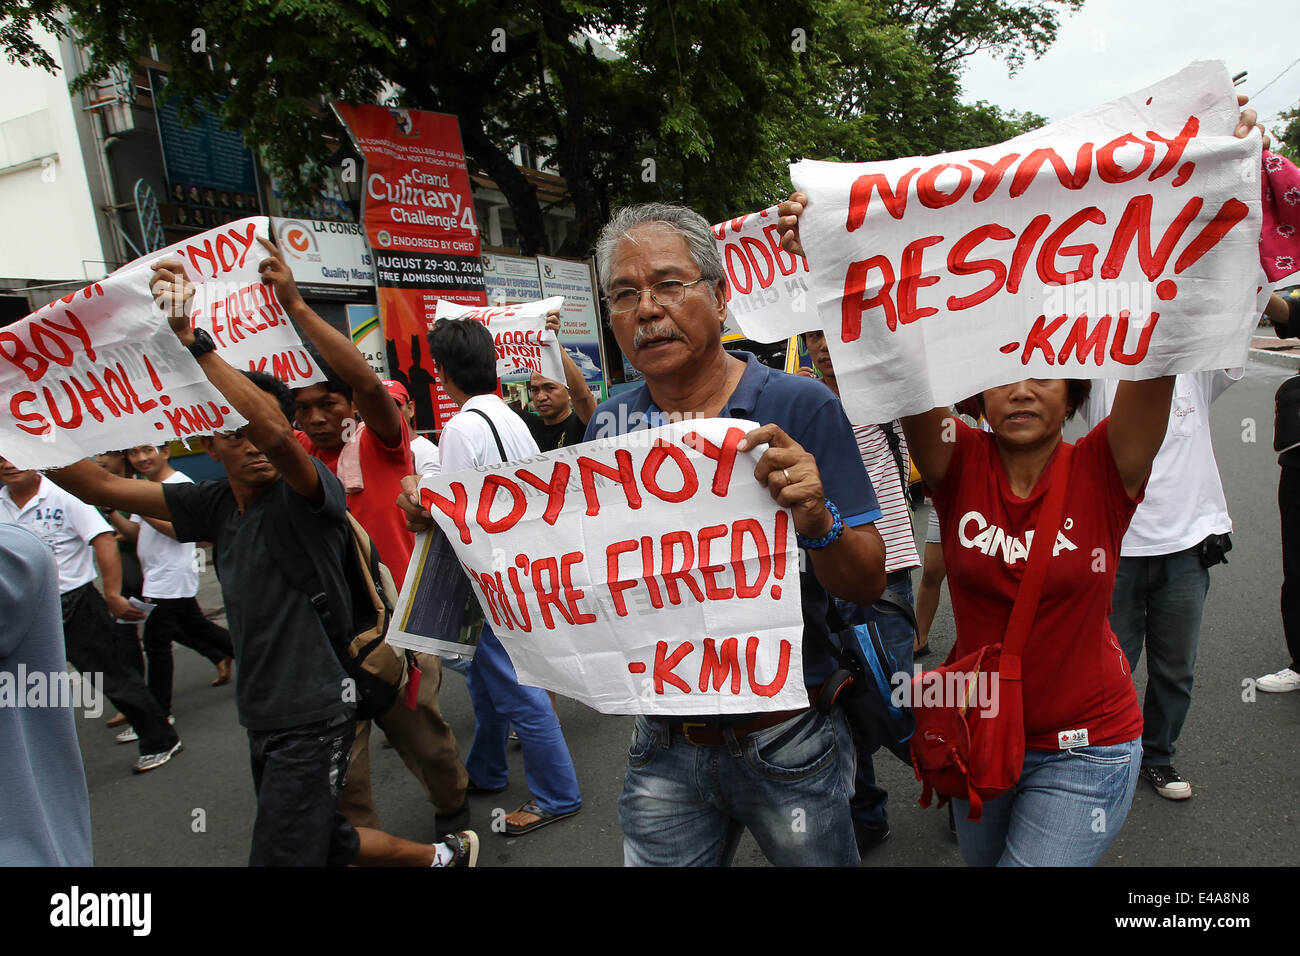 Manila, Philippines. 7th July, 2014. Activists hold placards as they call for President Aquino III to step down from office during a protest rally in Manila, the Philippines, July 7, 2014. A former government official on Monday filed another impeachment complaint against Philippine President Benigno Aquino III for bribery and violation of the Philippine Constitution. Credit:  Rouelle Umali/Xinhua/Alamy Live News Stock Photo